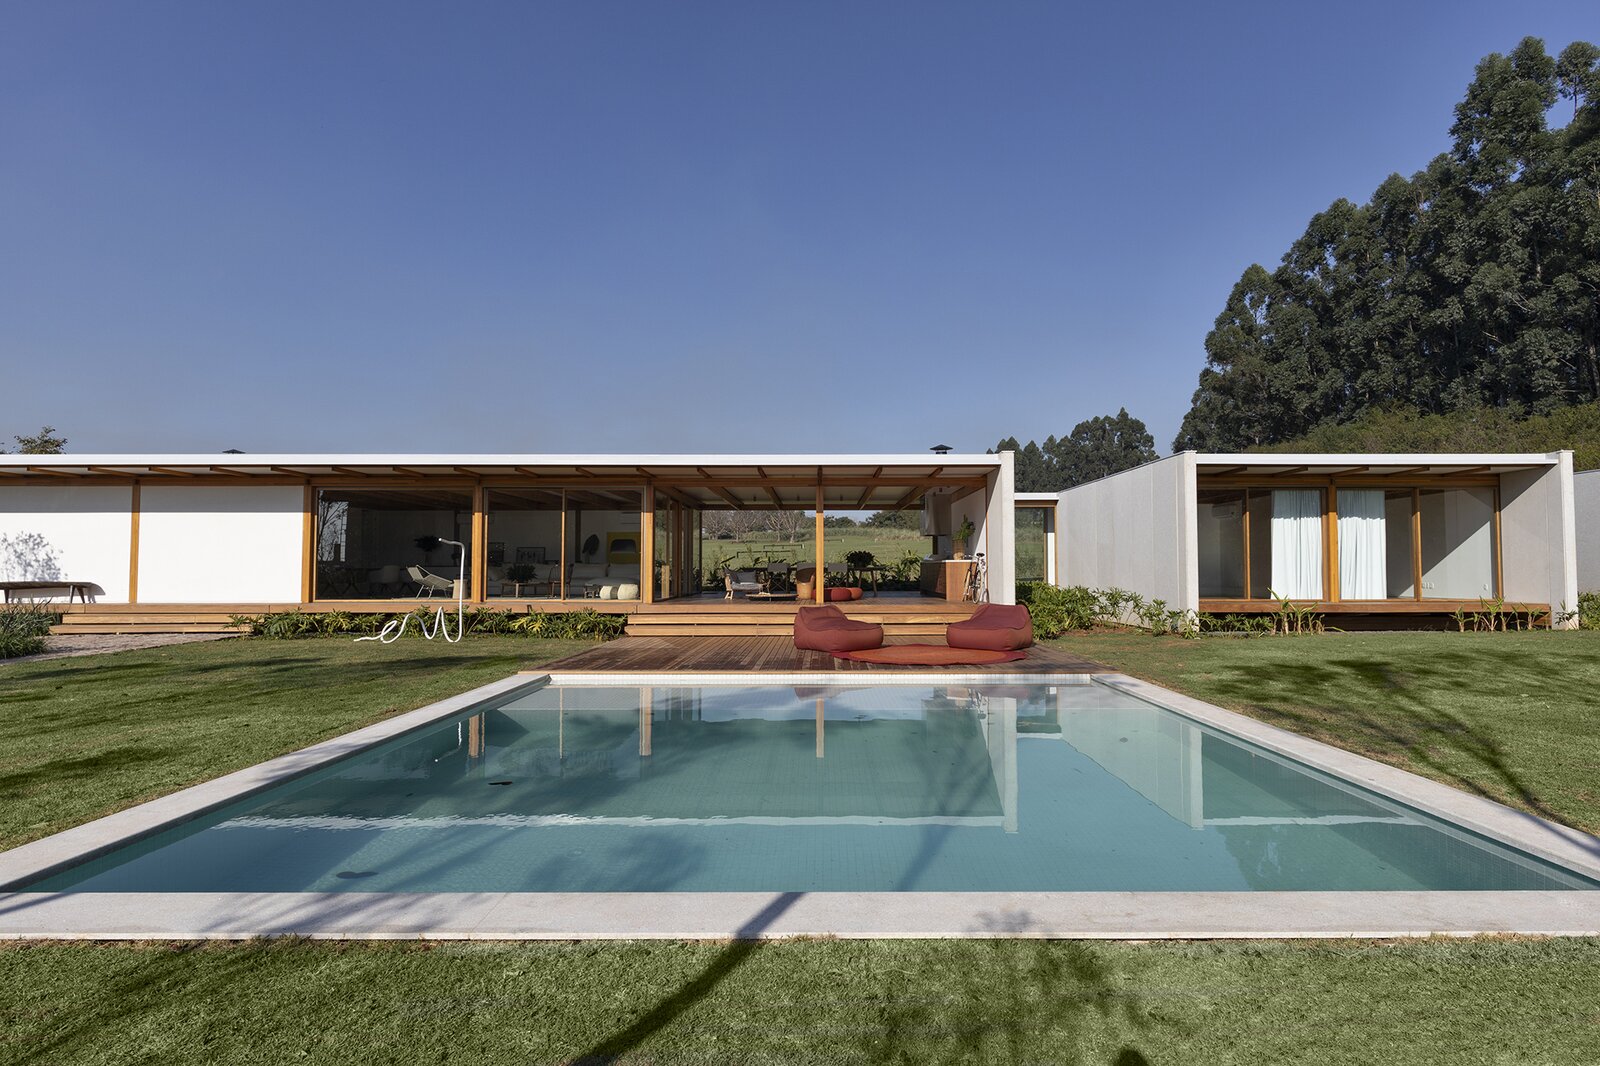 This Energy-Efficient Prefab in Brazil Can Be Easily Expanded for More Space